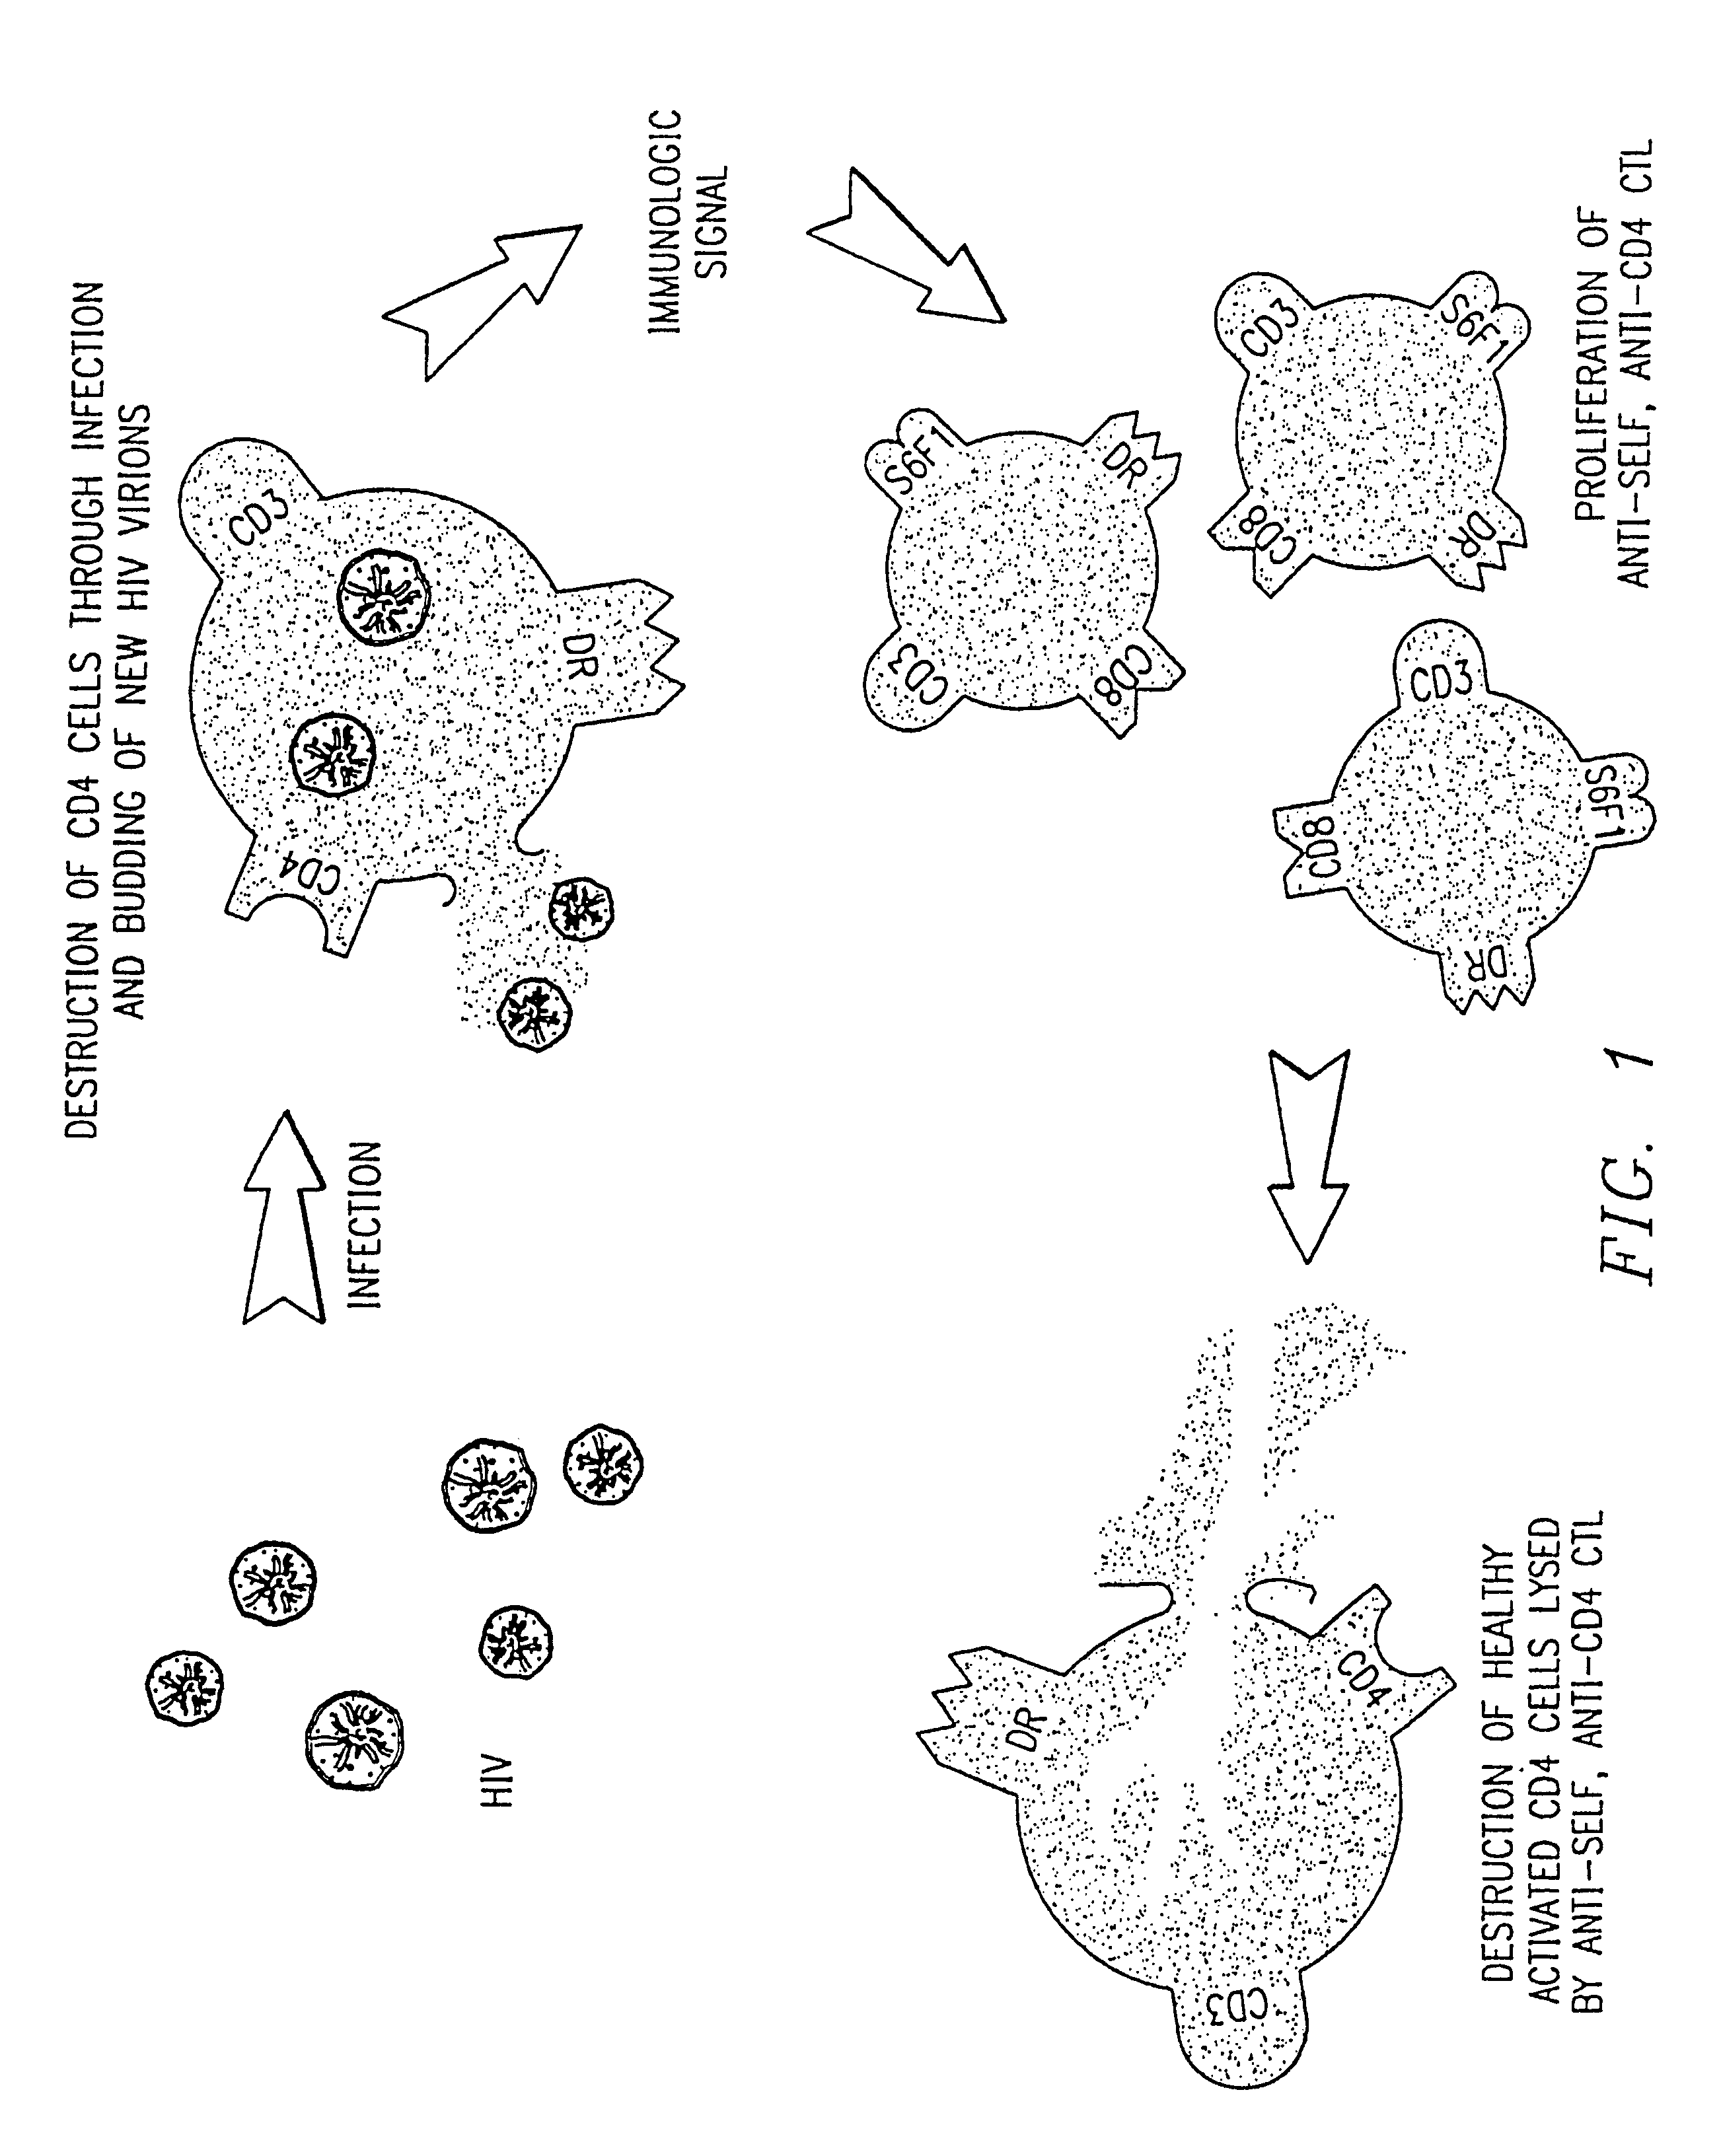 Method increasing the delayed-type hypersensitivity response by infusing LFA-1-specific antibodies